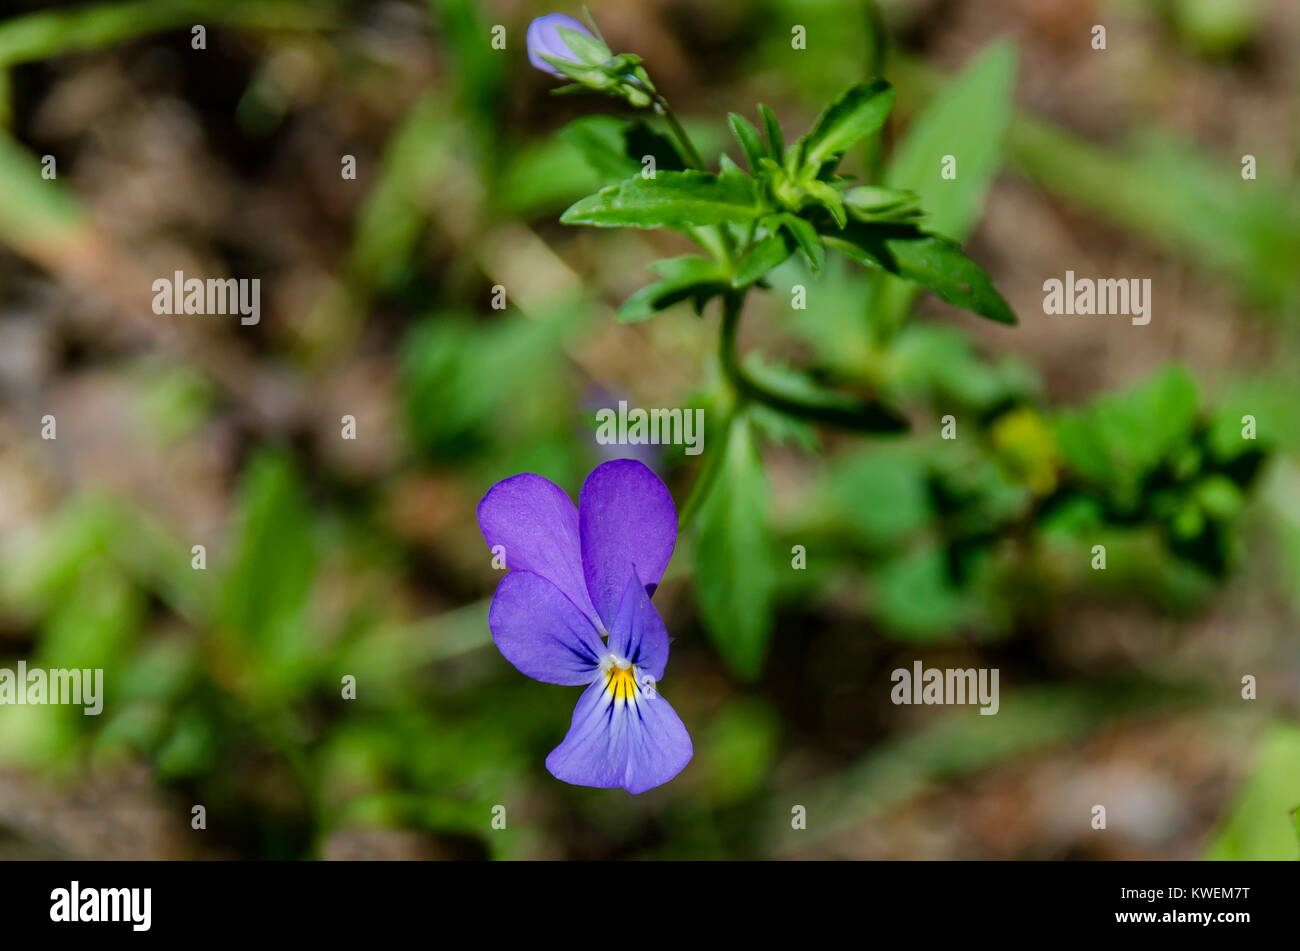 Heartsease or Viola tricolor blooming in the glade, Plana mountain, Bulgaria Stock Photo